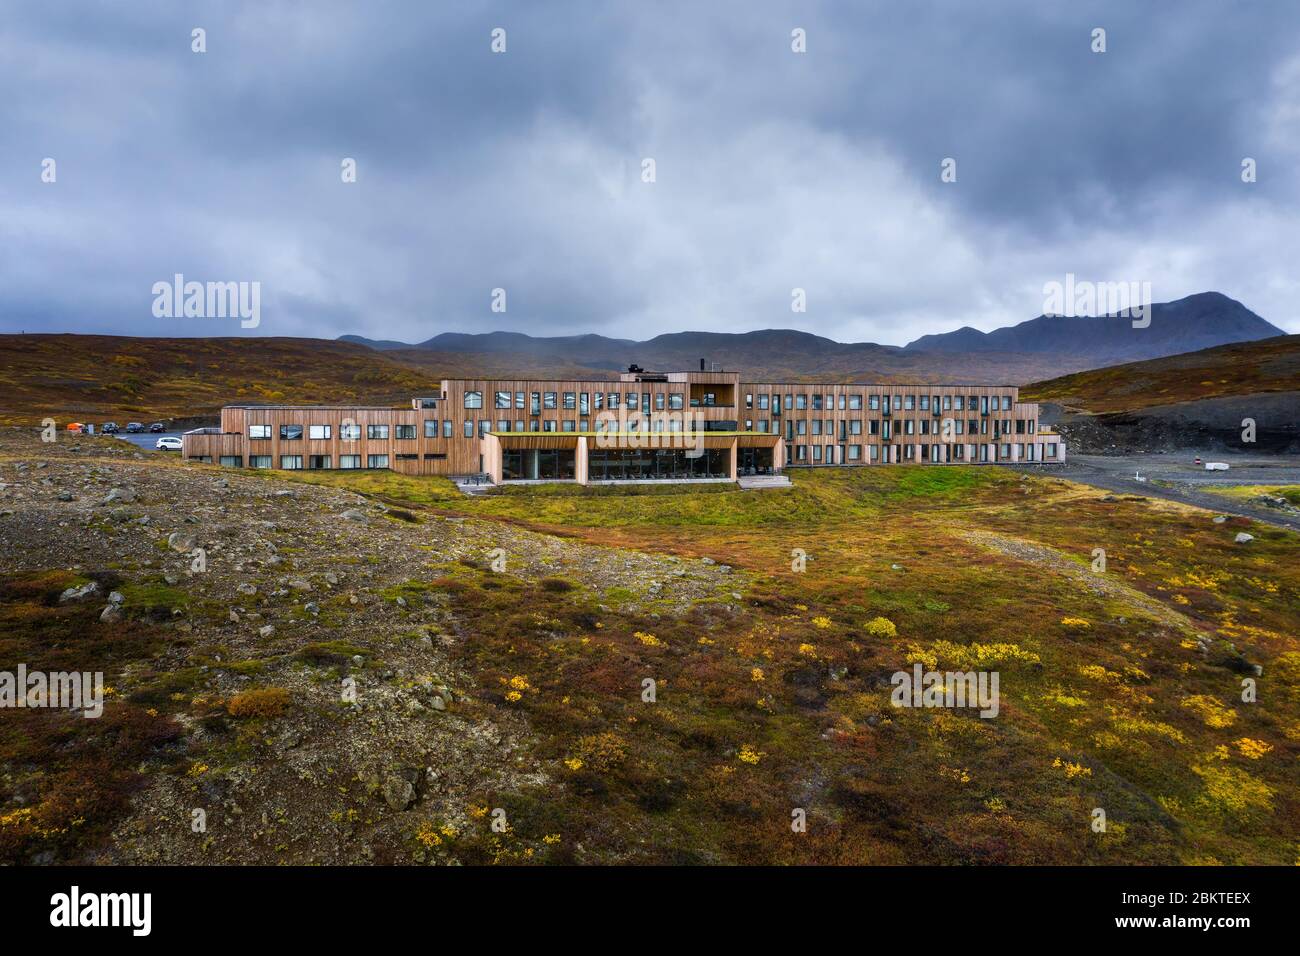 Fosshotel Myvatn located on the Ring Road near a beautiful lake in Iceland Stock Photo